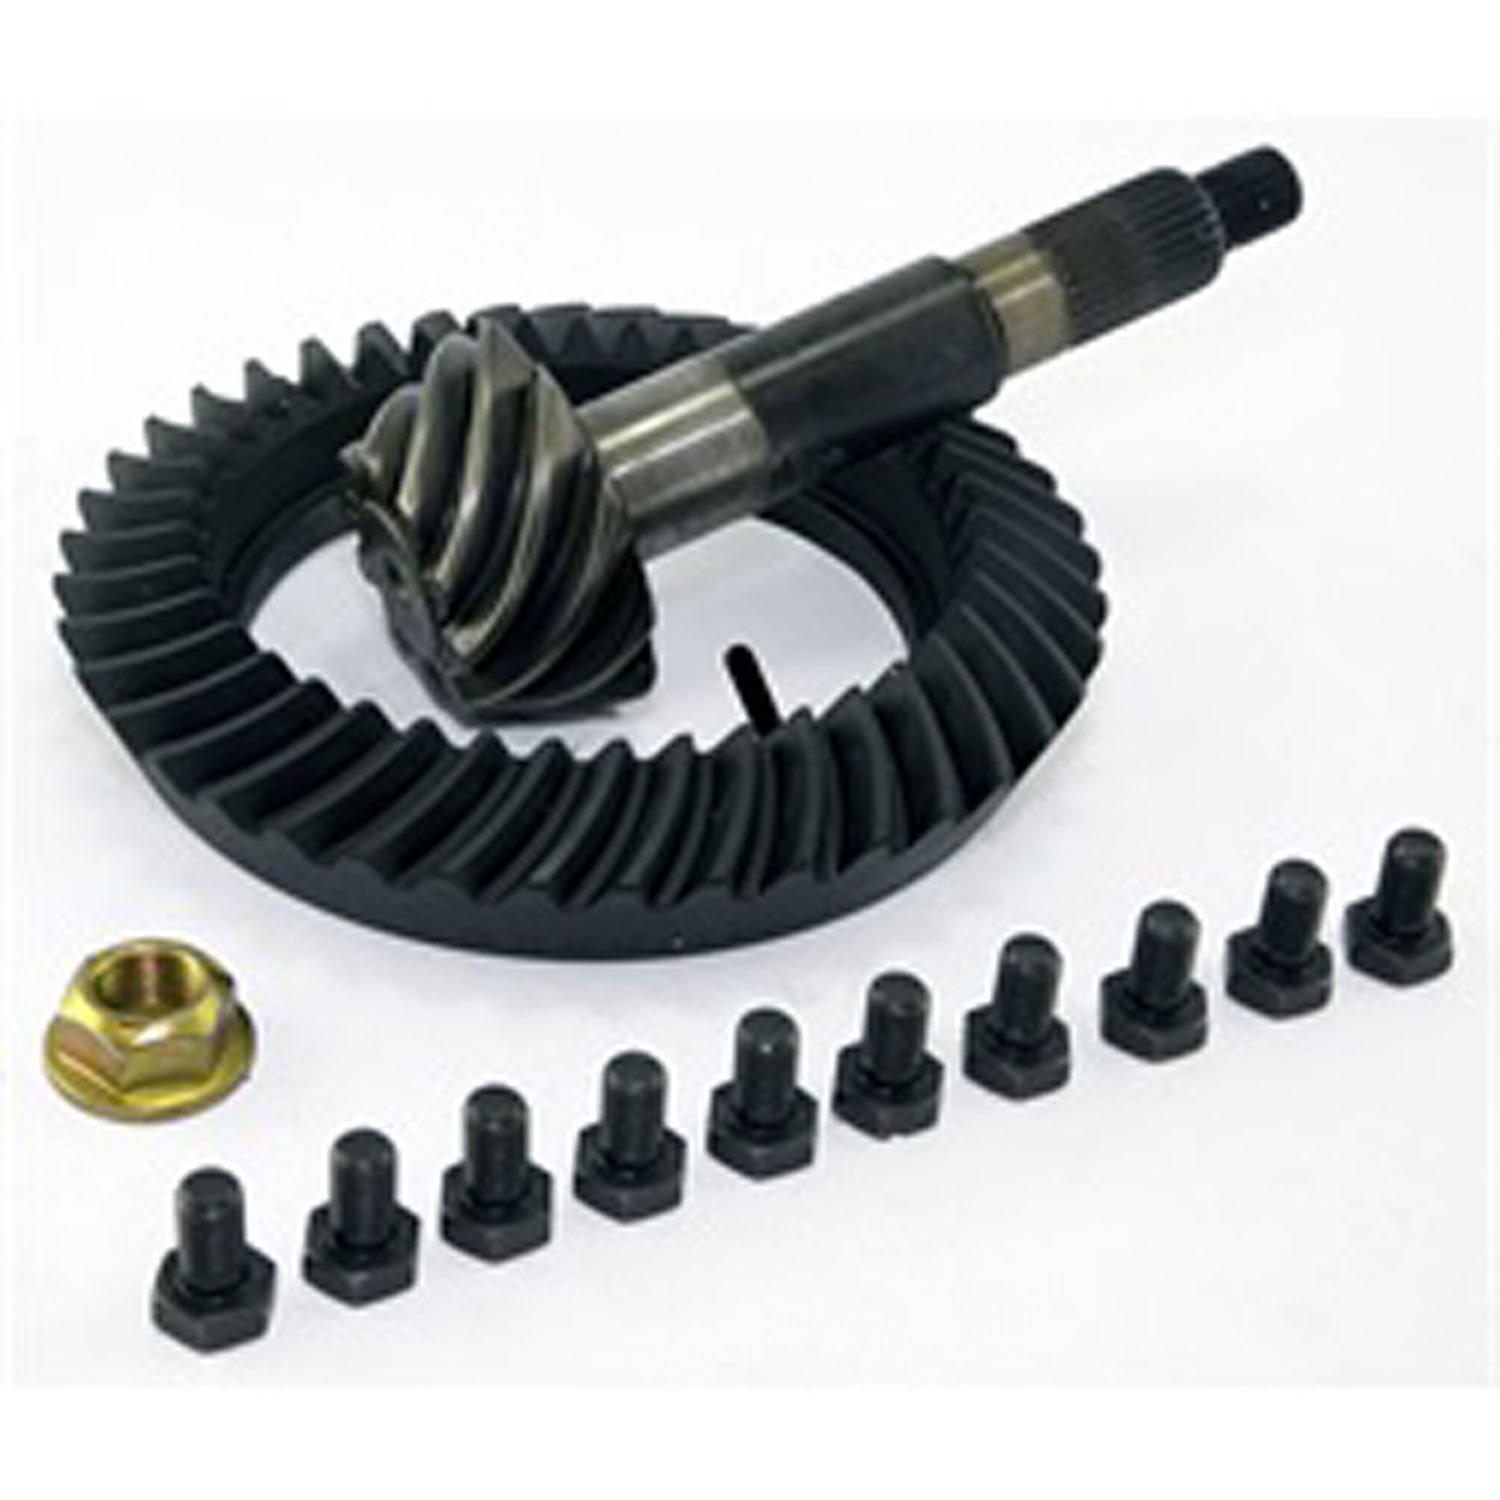 Spicer brand factory replacement ring and pinion kit has a 4.10 ratio for Dana 44 axles front